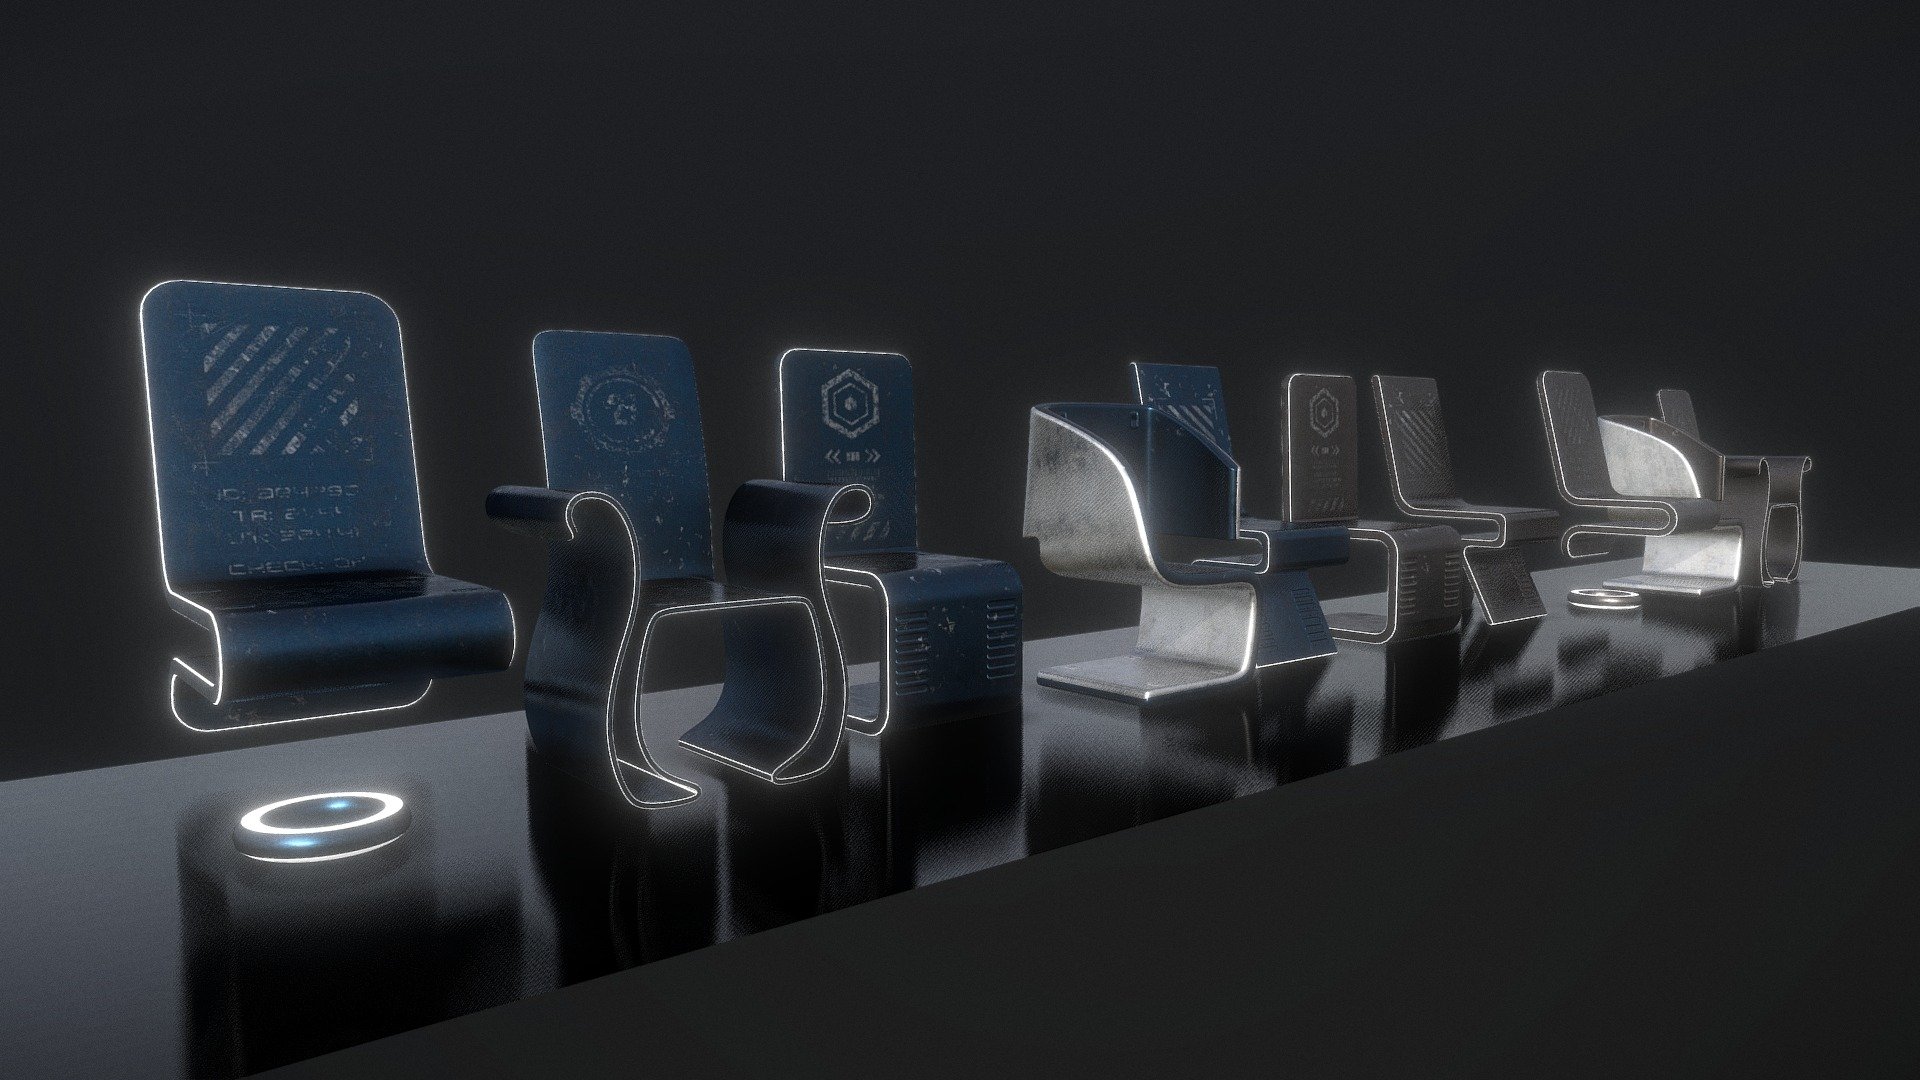 Sci-fi Chairs with all the Textures like diffuse,normal,roughness and Metallic with 3 color variations.
You can easily remove the emissive edges by removing the emissive Material from the mesh.
All the Required files/Textures are contained in Additional Files.
Thank You!

Free version will be available soon - Sci-fi Chairs - Buy Royalty Free 3D model by Nicholas-3D (@Nicholas01) 3d model